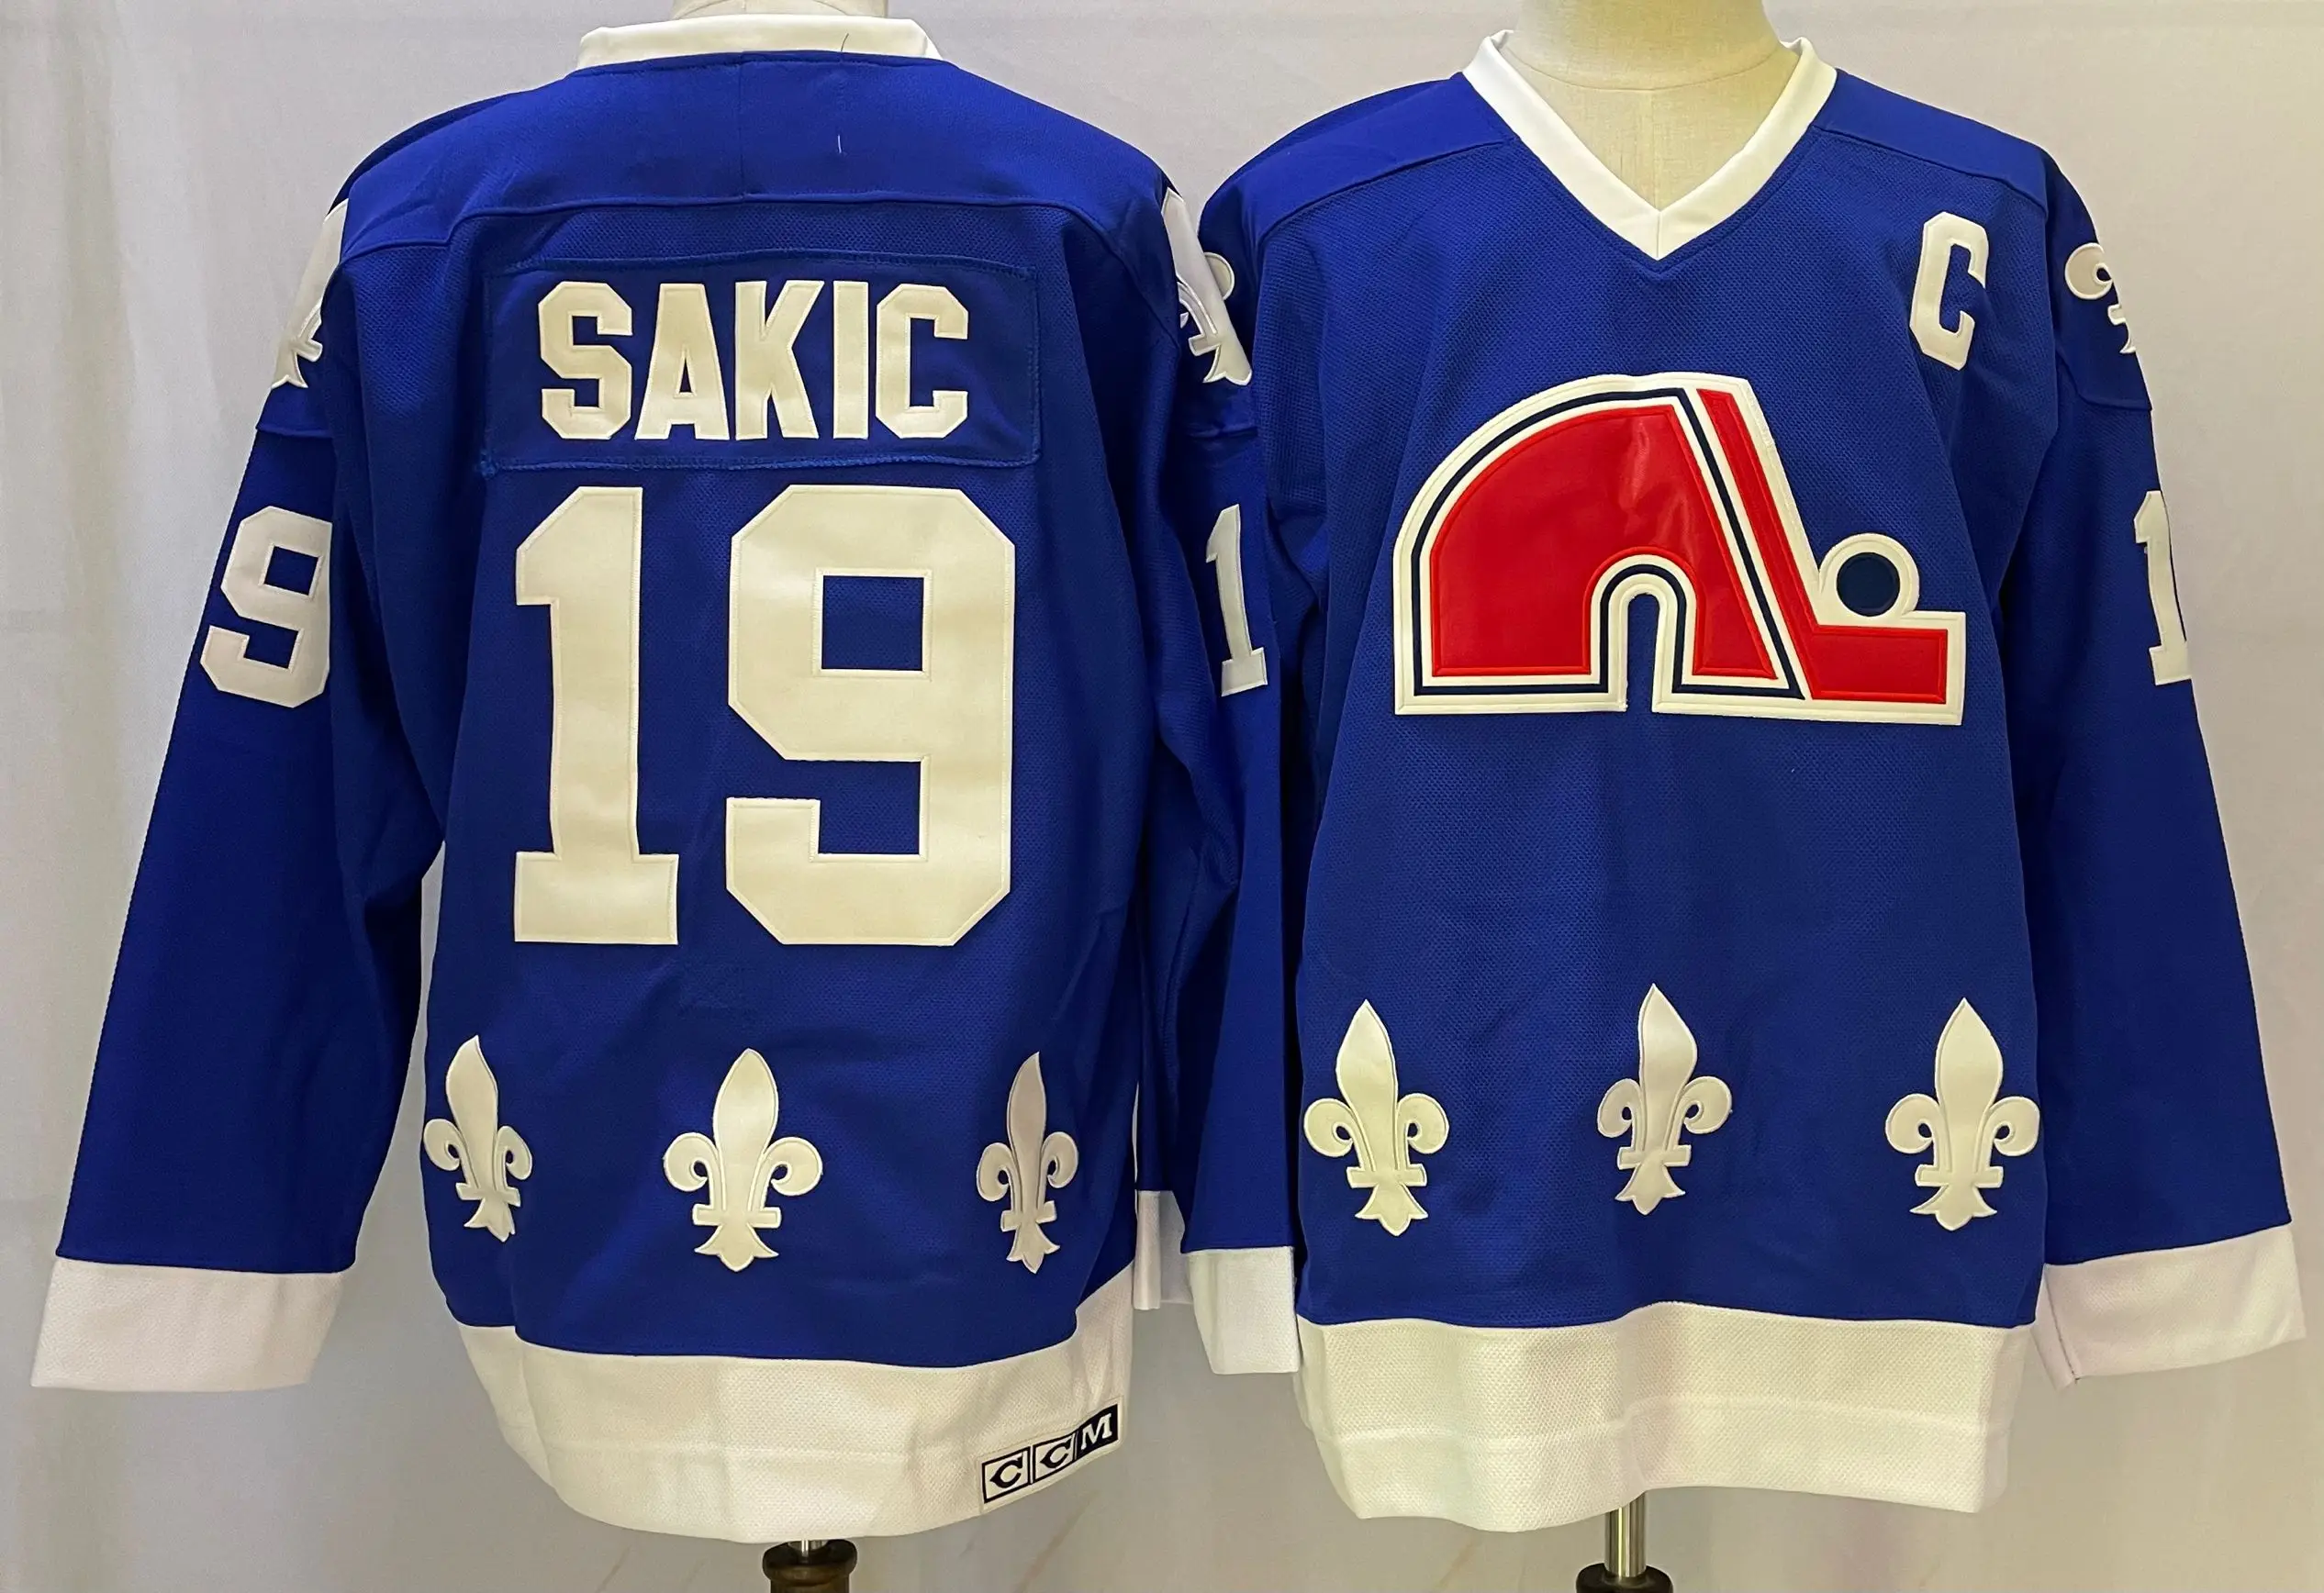 Sakic Jersey 19 Quebec Ice Hockey Jersey 21 Forsberg Jersey Retro Sport Sweater Old Team Stitched Letters Numbers S-XXXL